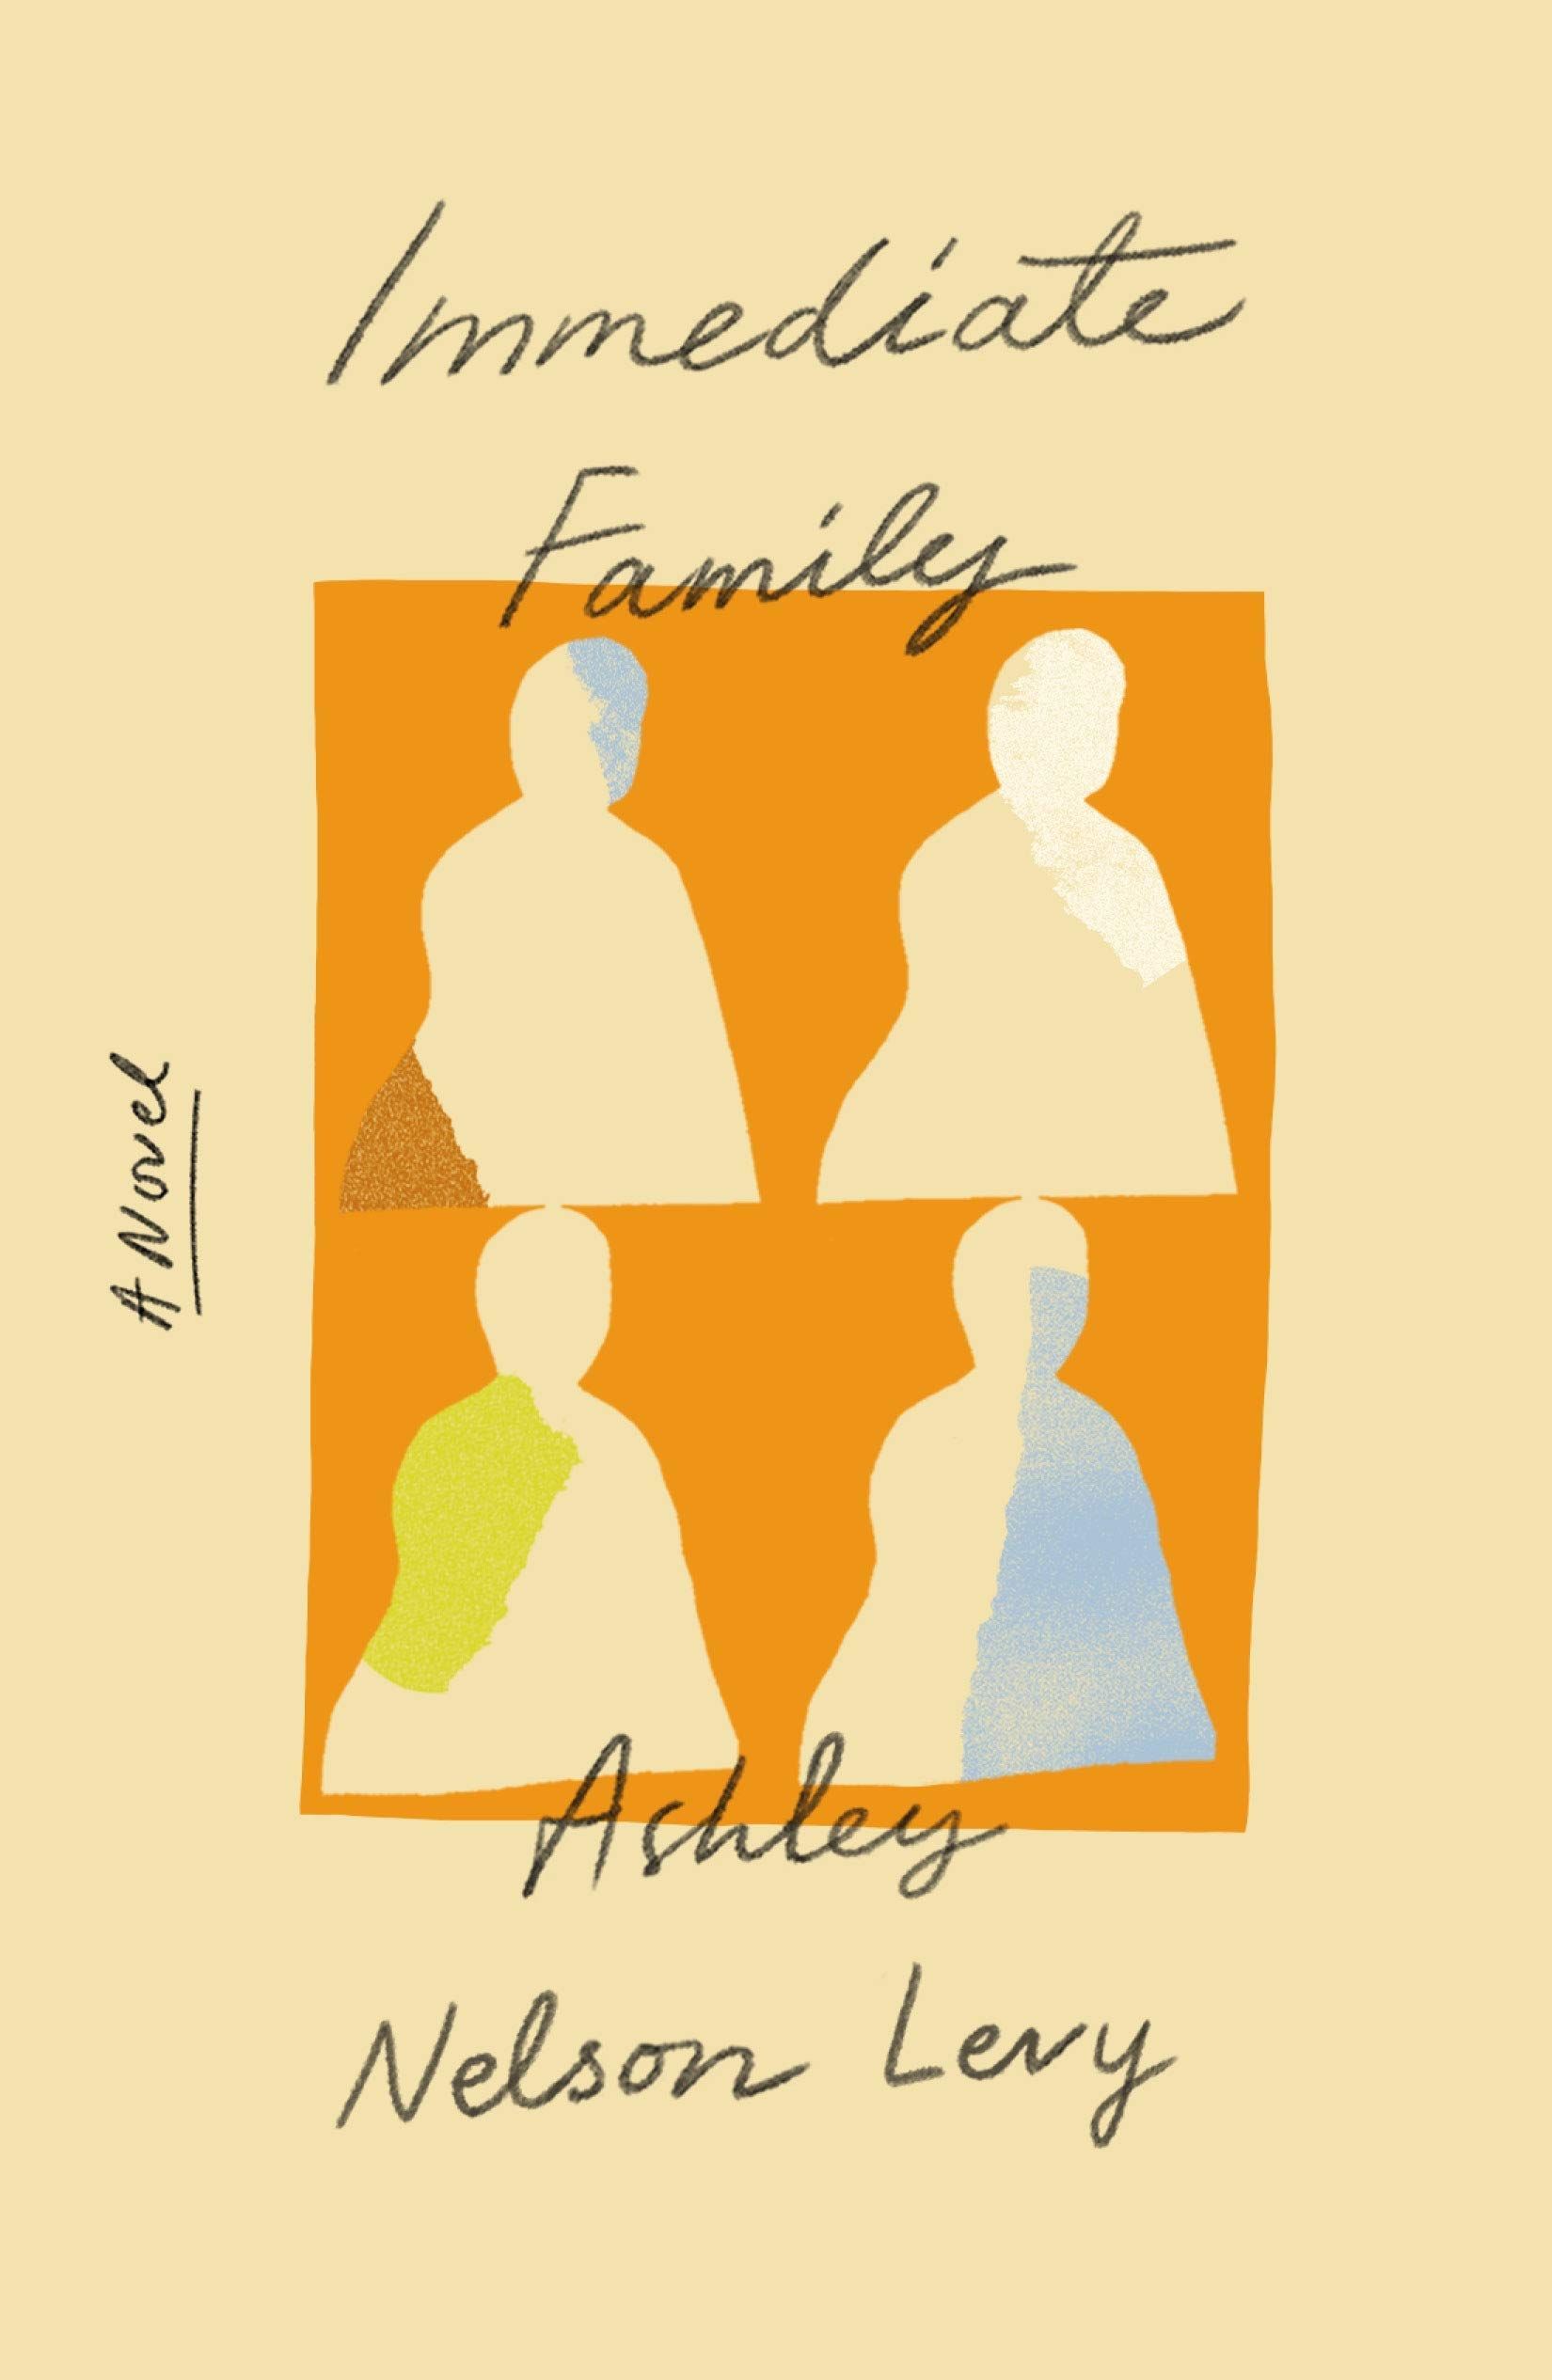 “A Stranger Steps into the House”: On Ashley Nelson Levy’s “Immediate Family”